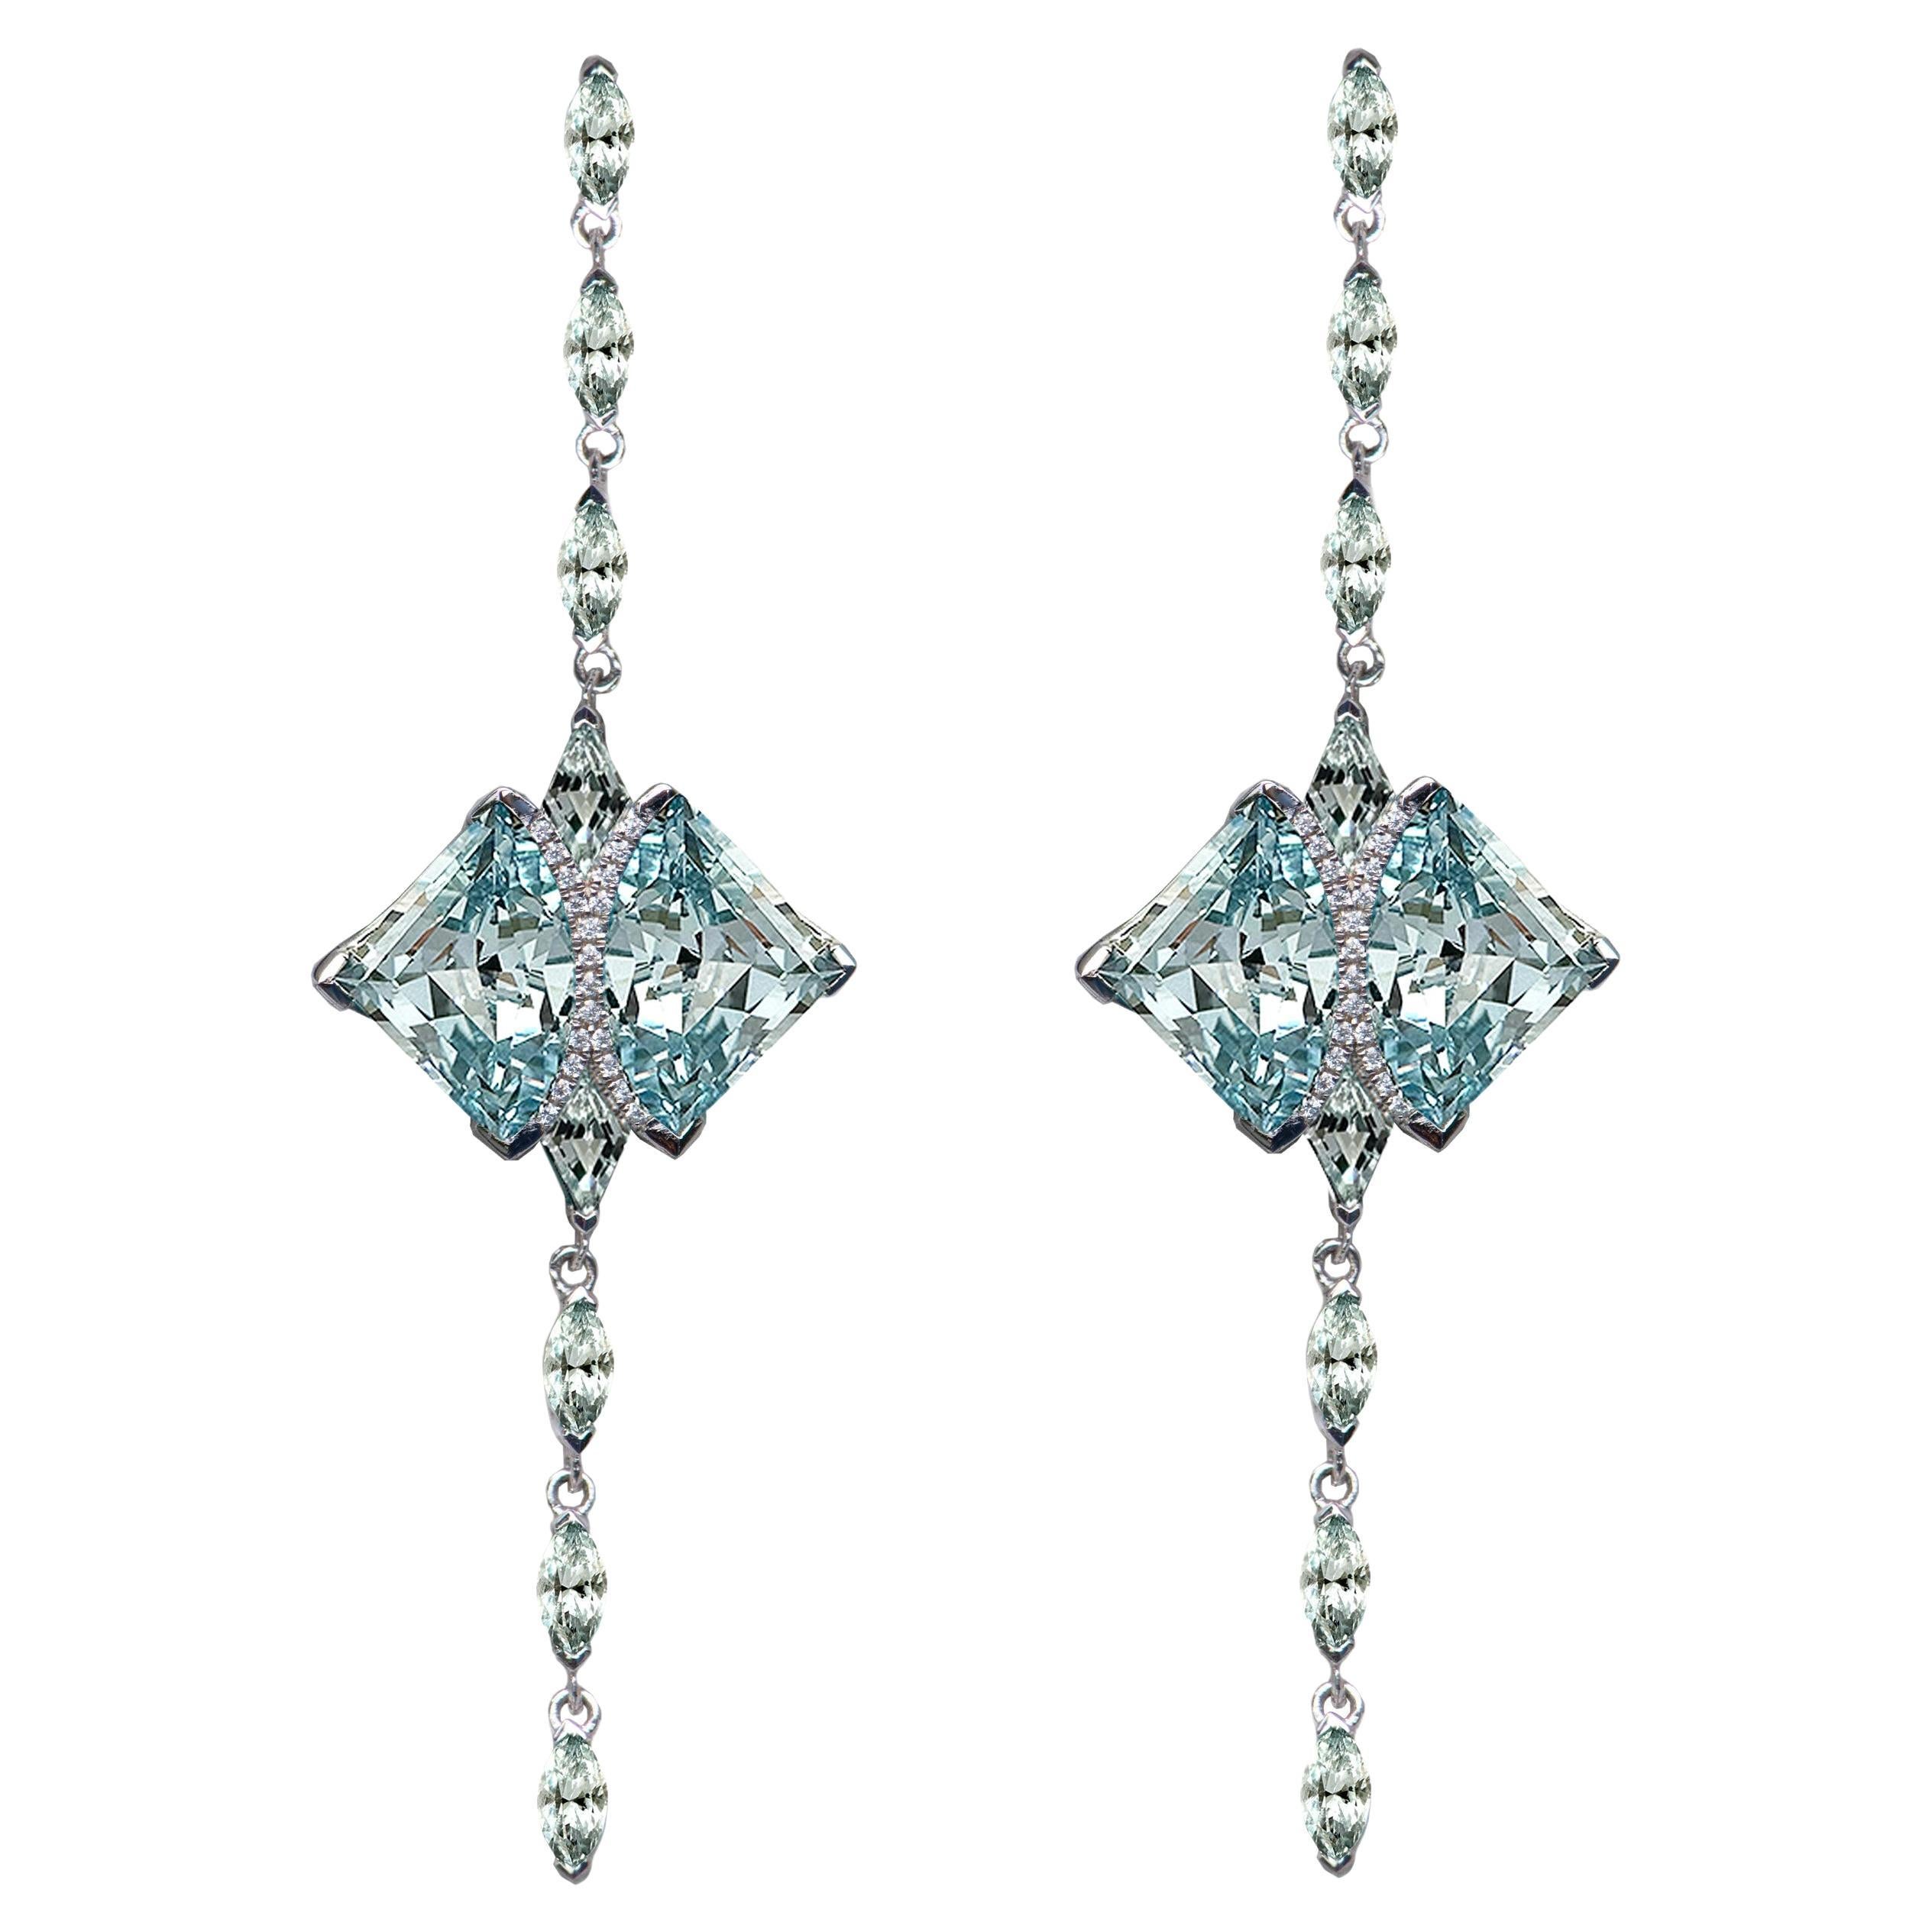 The 20ct Aquamarine Eagle Ray Earrings, 18Kt White Gold